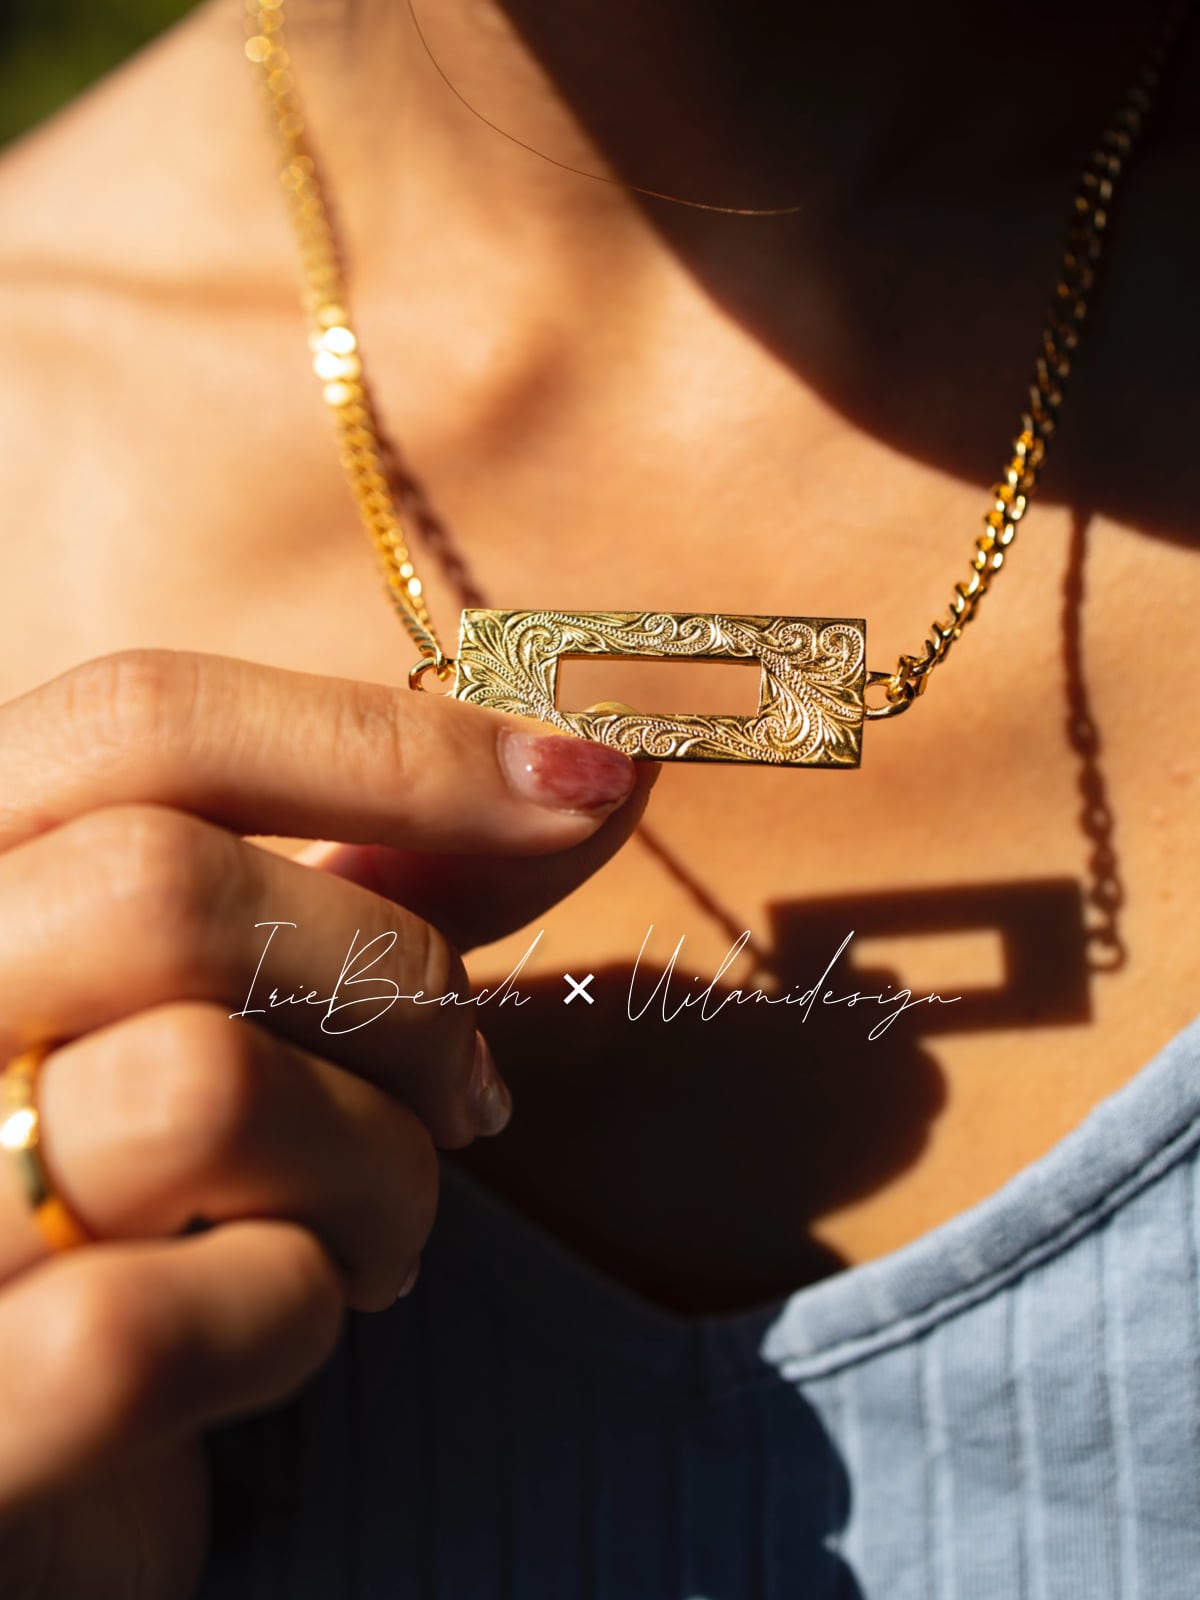 Collaboration Necklace IRIE BEACH×Uilanidesign | IRIEBEACH powered by BASE